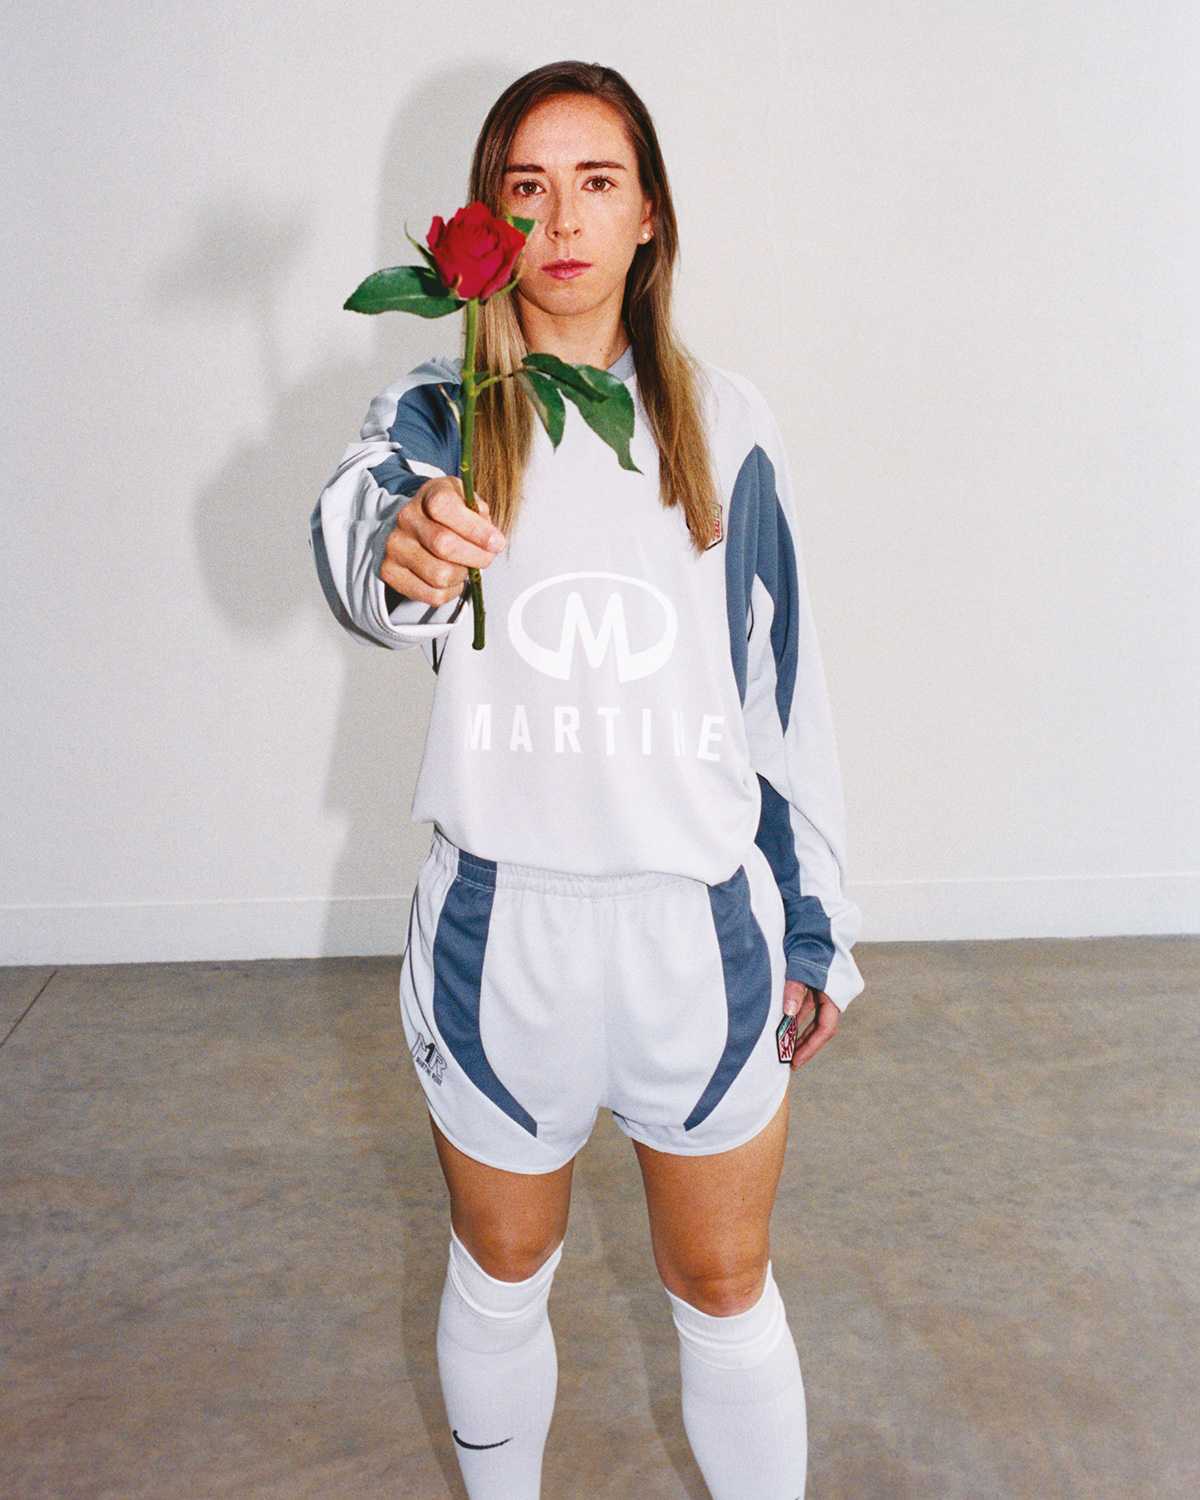 Martine Rose and Nike celebrates women's football and British Subculture